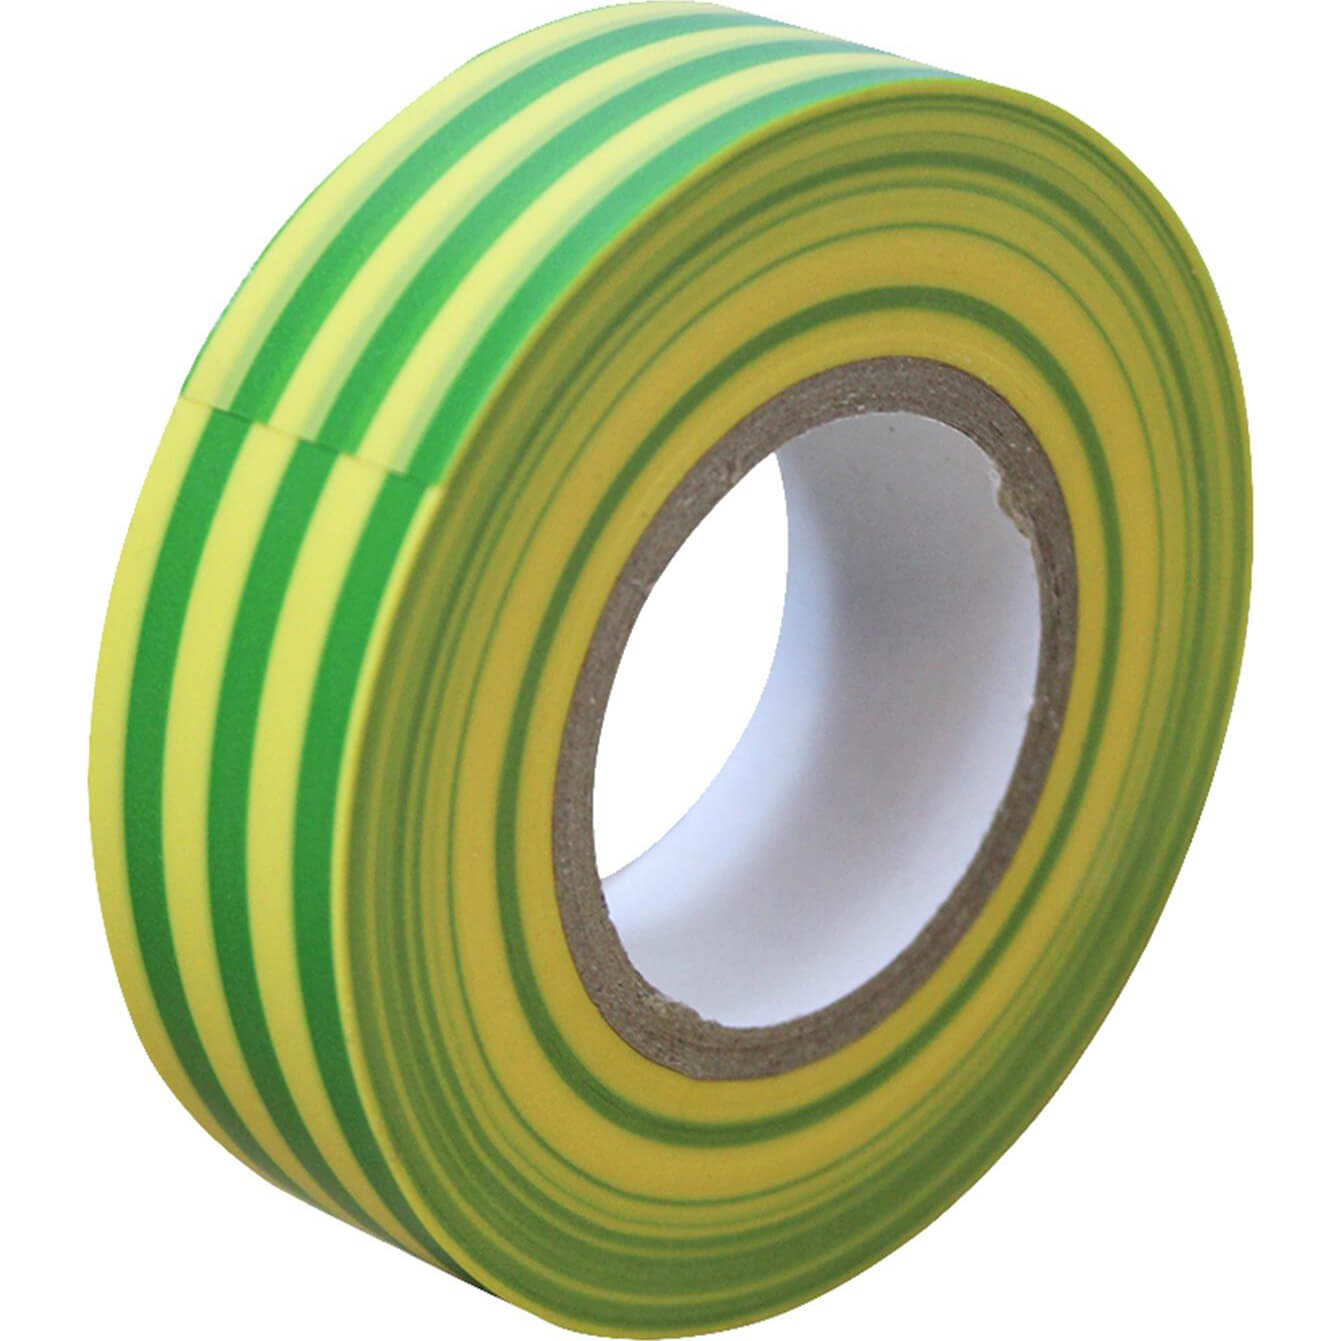 Insulation Tape Green / Yellow 19mm Wide x 33m Roll